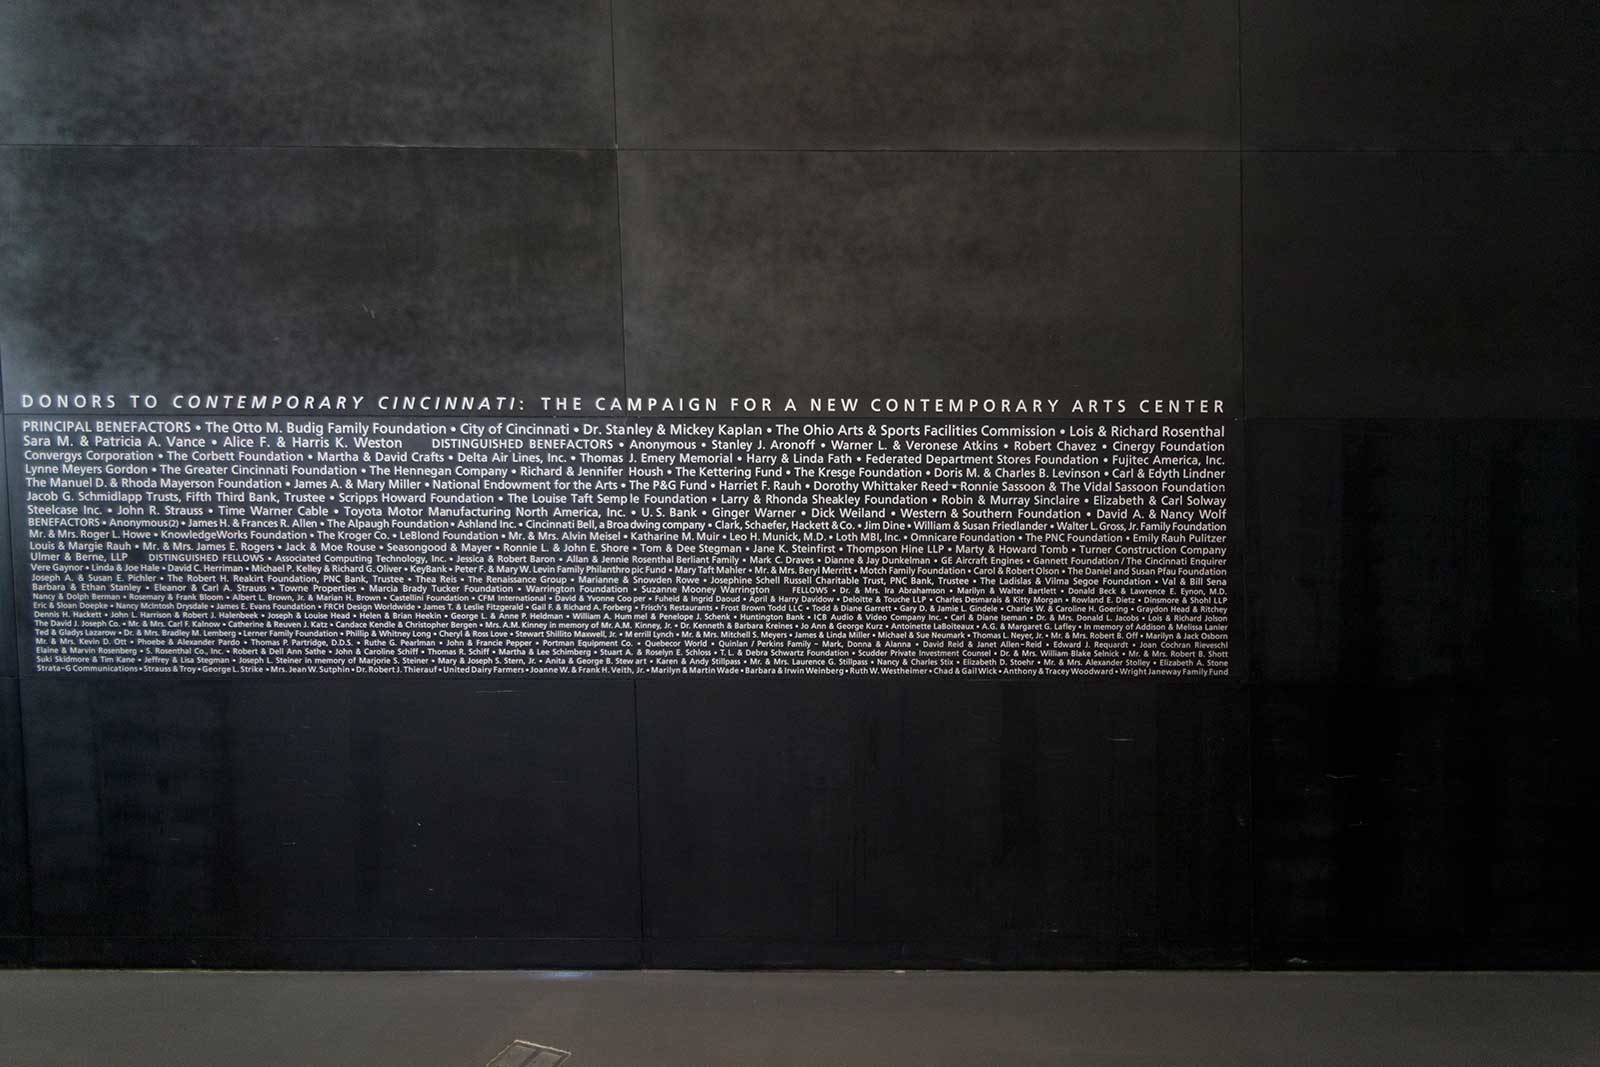 Interior detail of the donor list at Rosenthal Center.